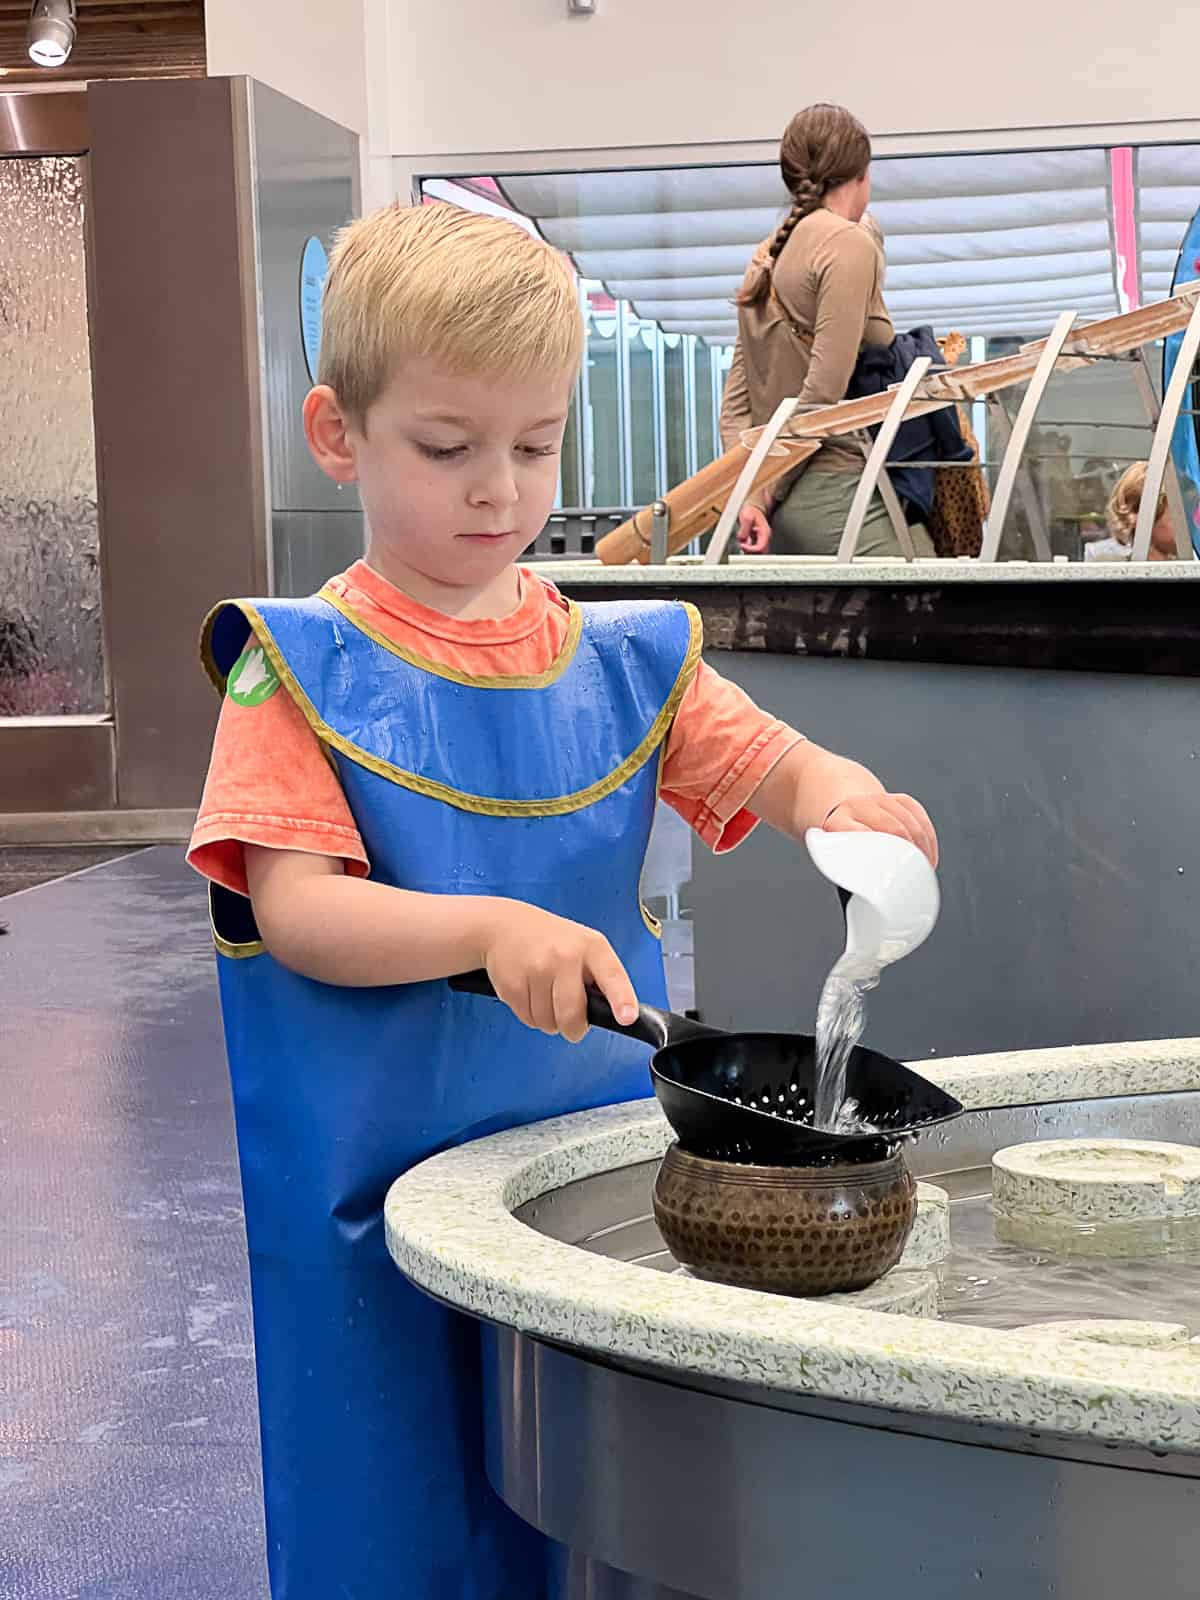 Family Friendly Activity at Children's Museum with water at Thinkery Austin TX